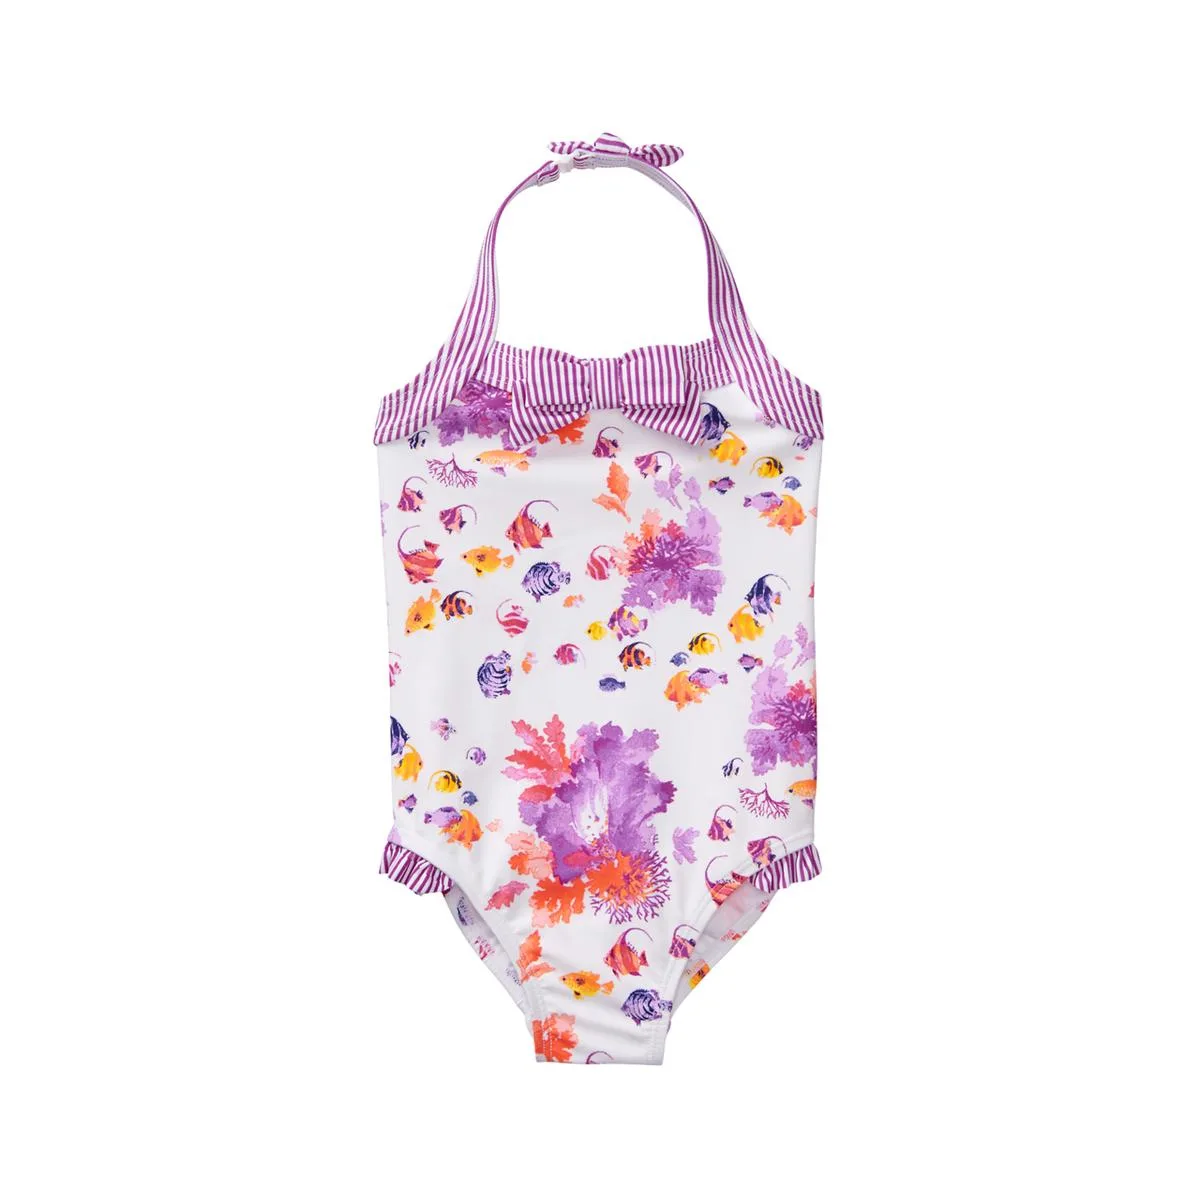 reef Most Adorable Toddler Girl Swimsuits These are the most adorable toddler girl swimsuits I have seen this season. If you're planning on taking your toddler to the beach then check out these tips for a happy vacation.  There are super cute girl bathing suits to fit any budget.  This post does contain affiliate links, any purchase you make doesn't cost you anything and helps support this site.